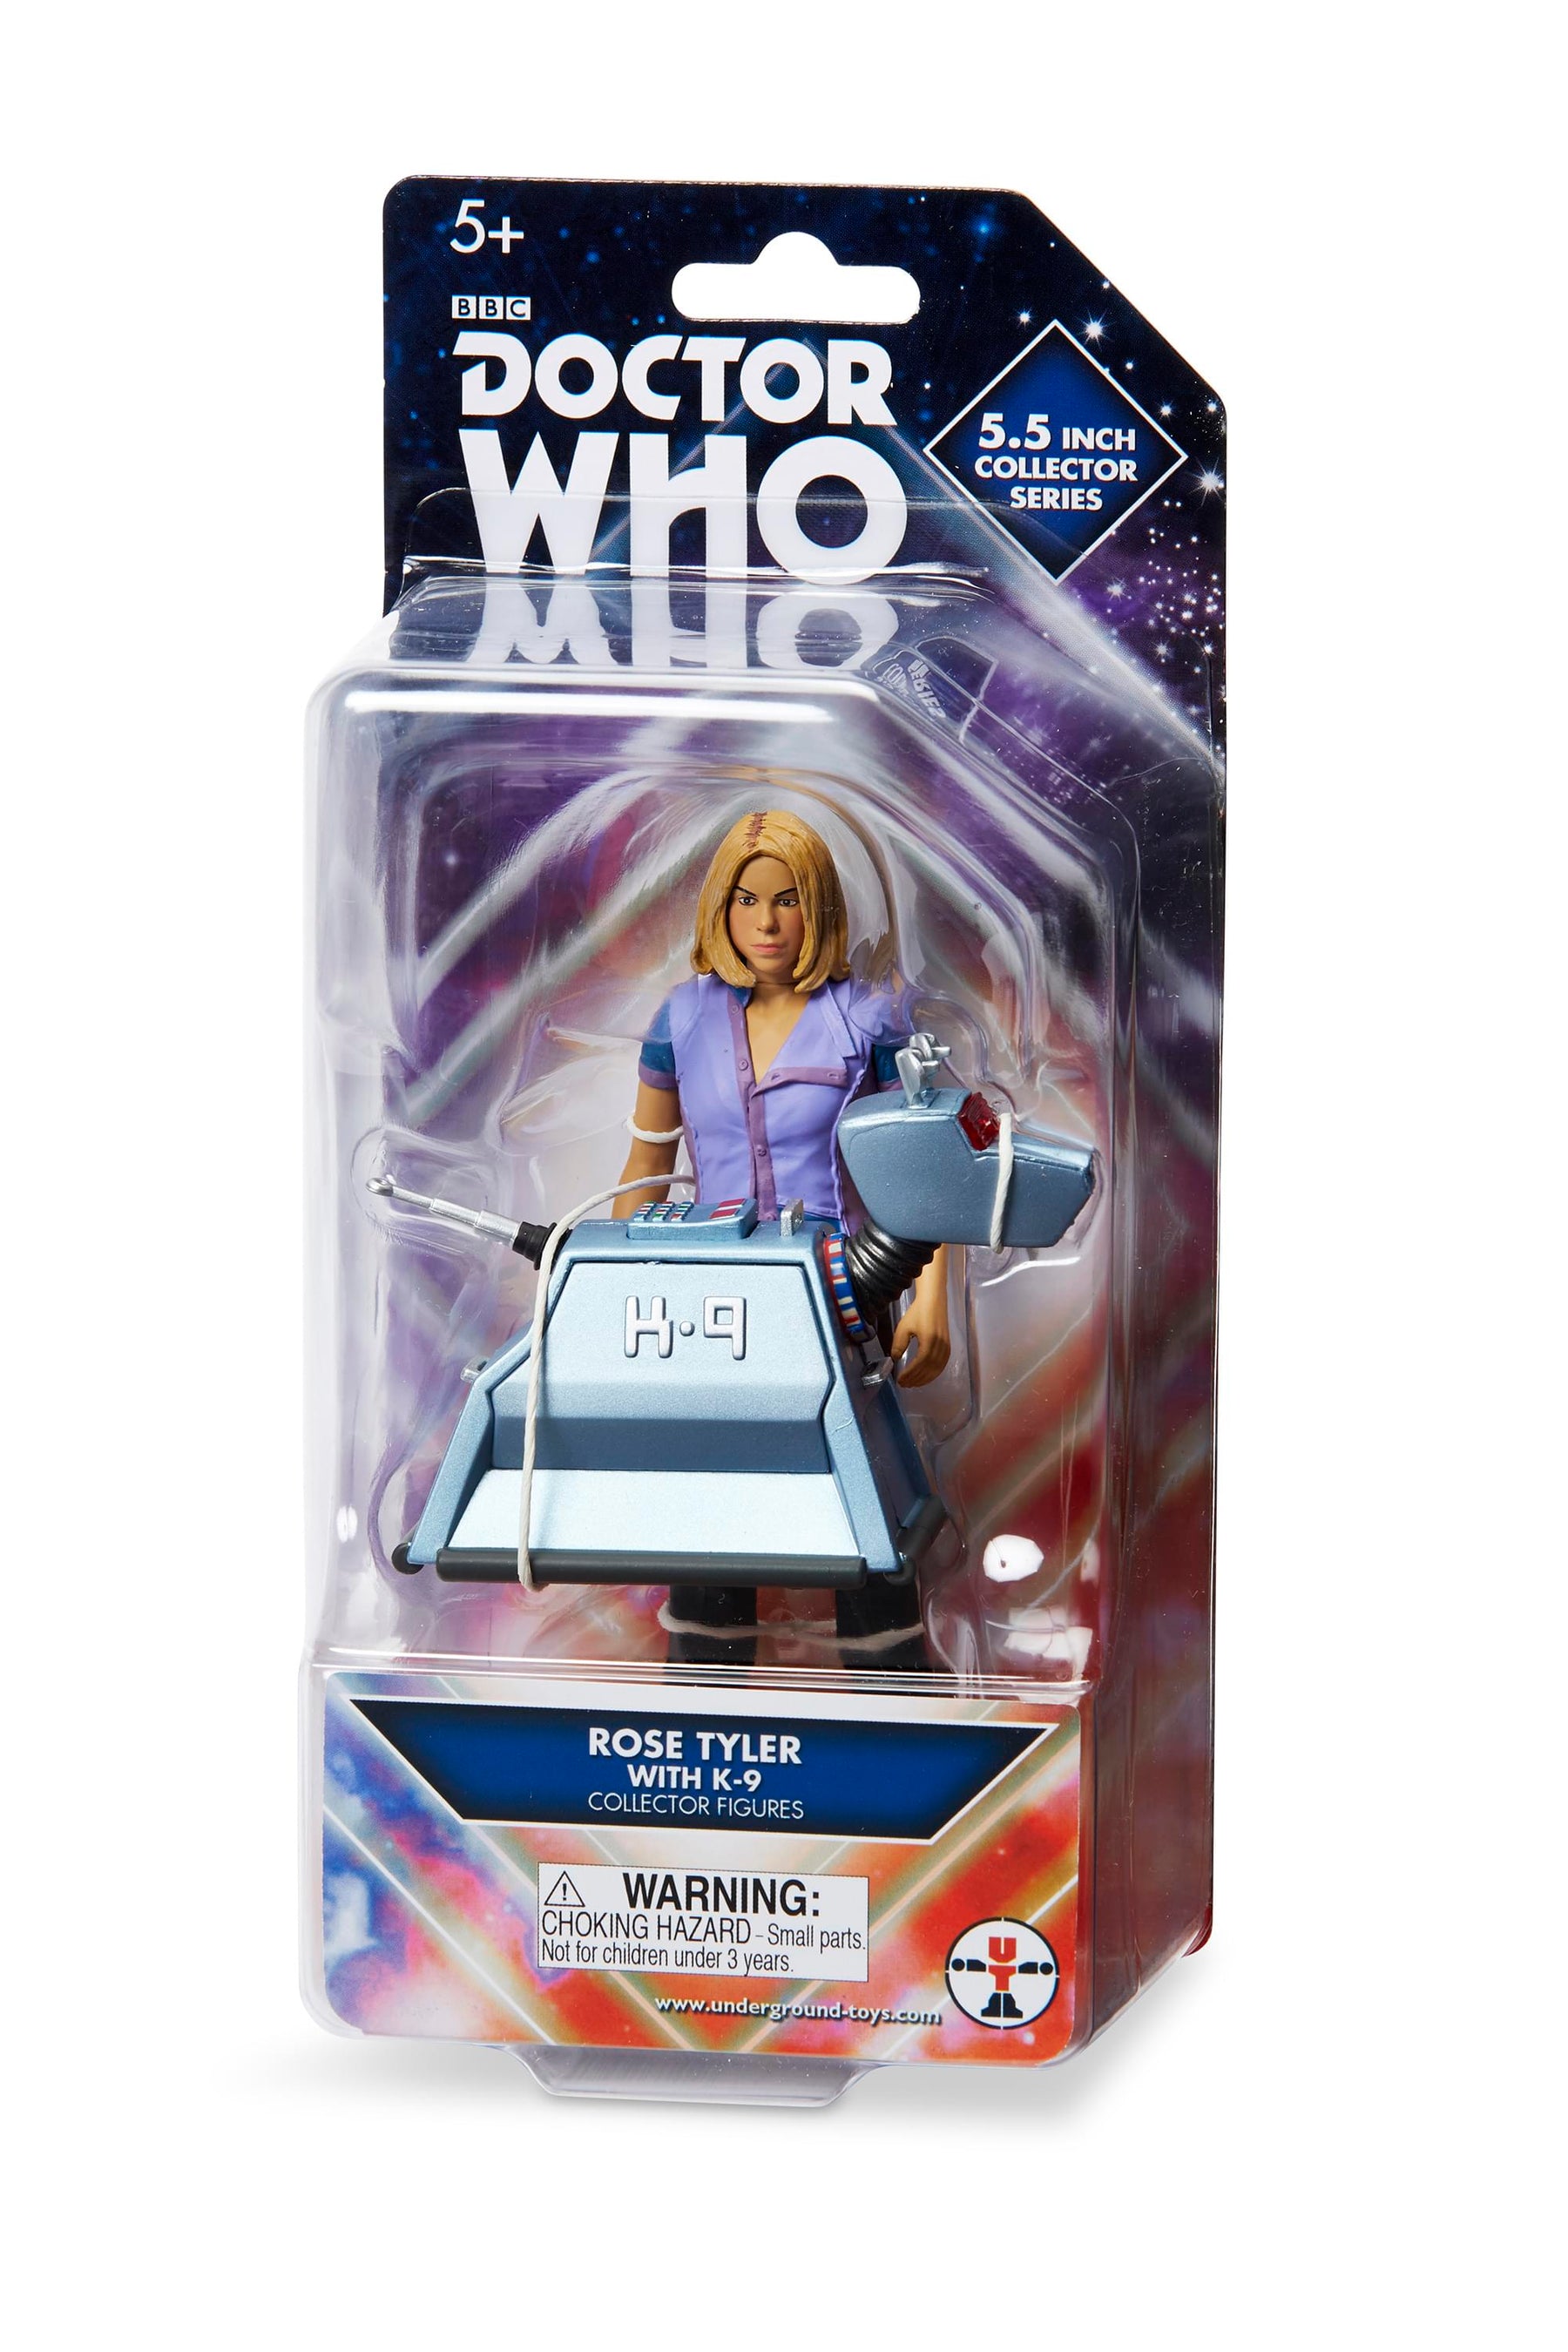 Doctor Who 5" Action Figure - Rose Tyler with K-9